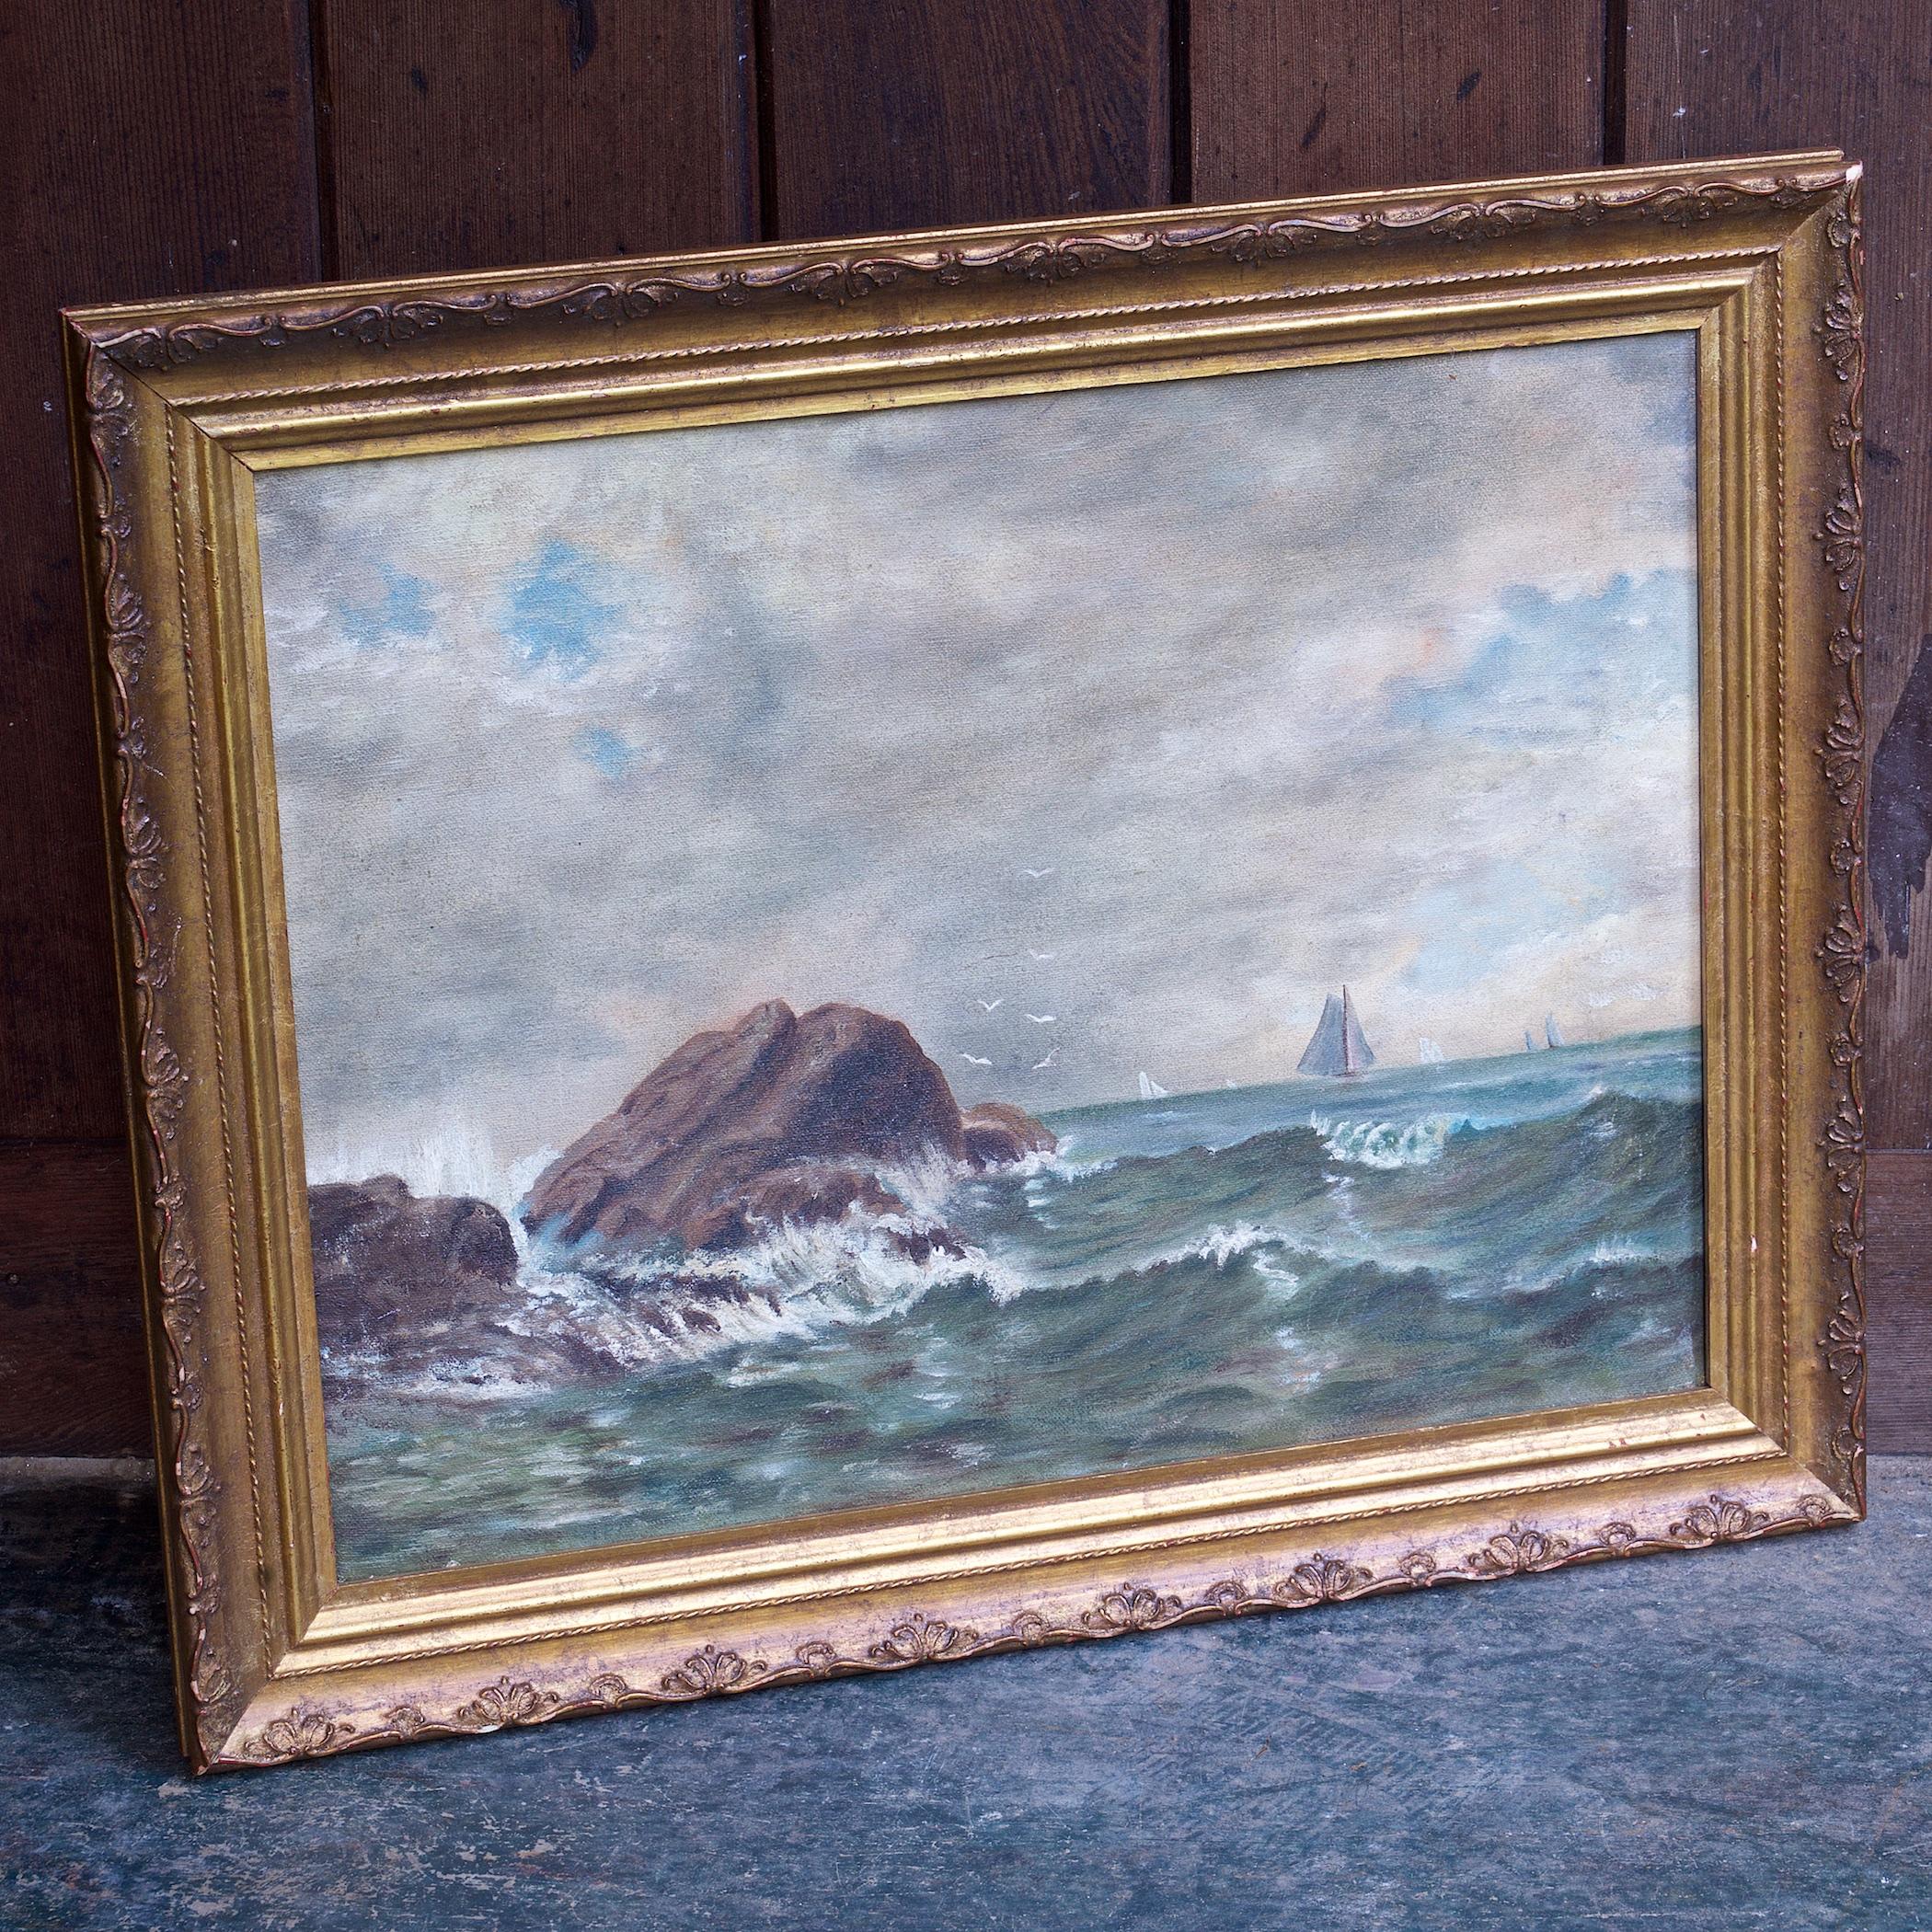 American Classical Antique Mid 19th Century Seascape Oil Painting with Rocks and Ship For Sale